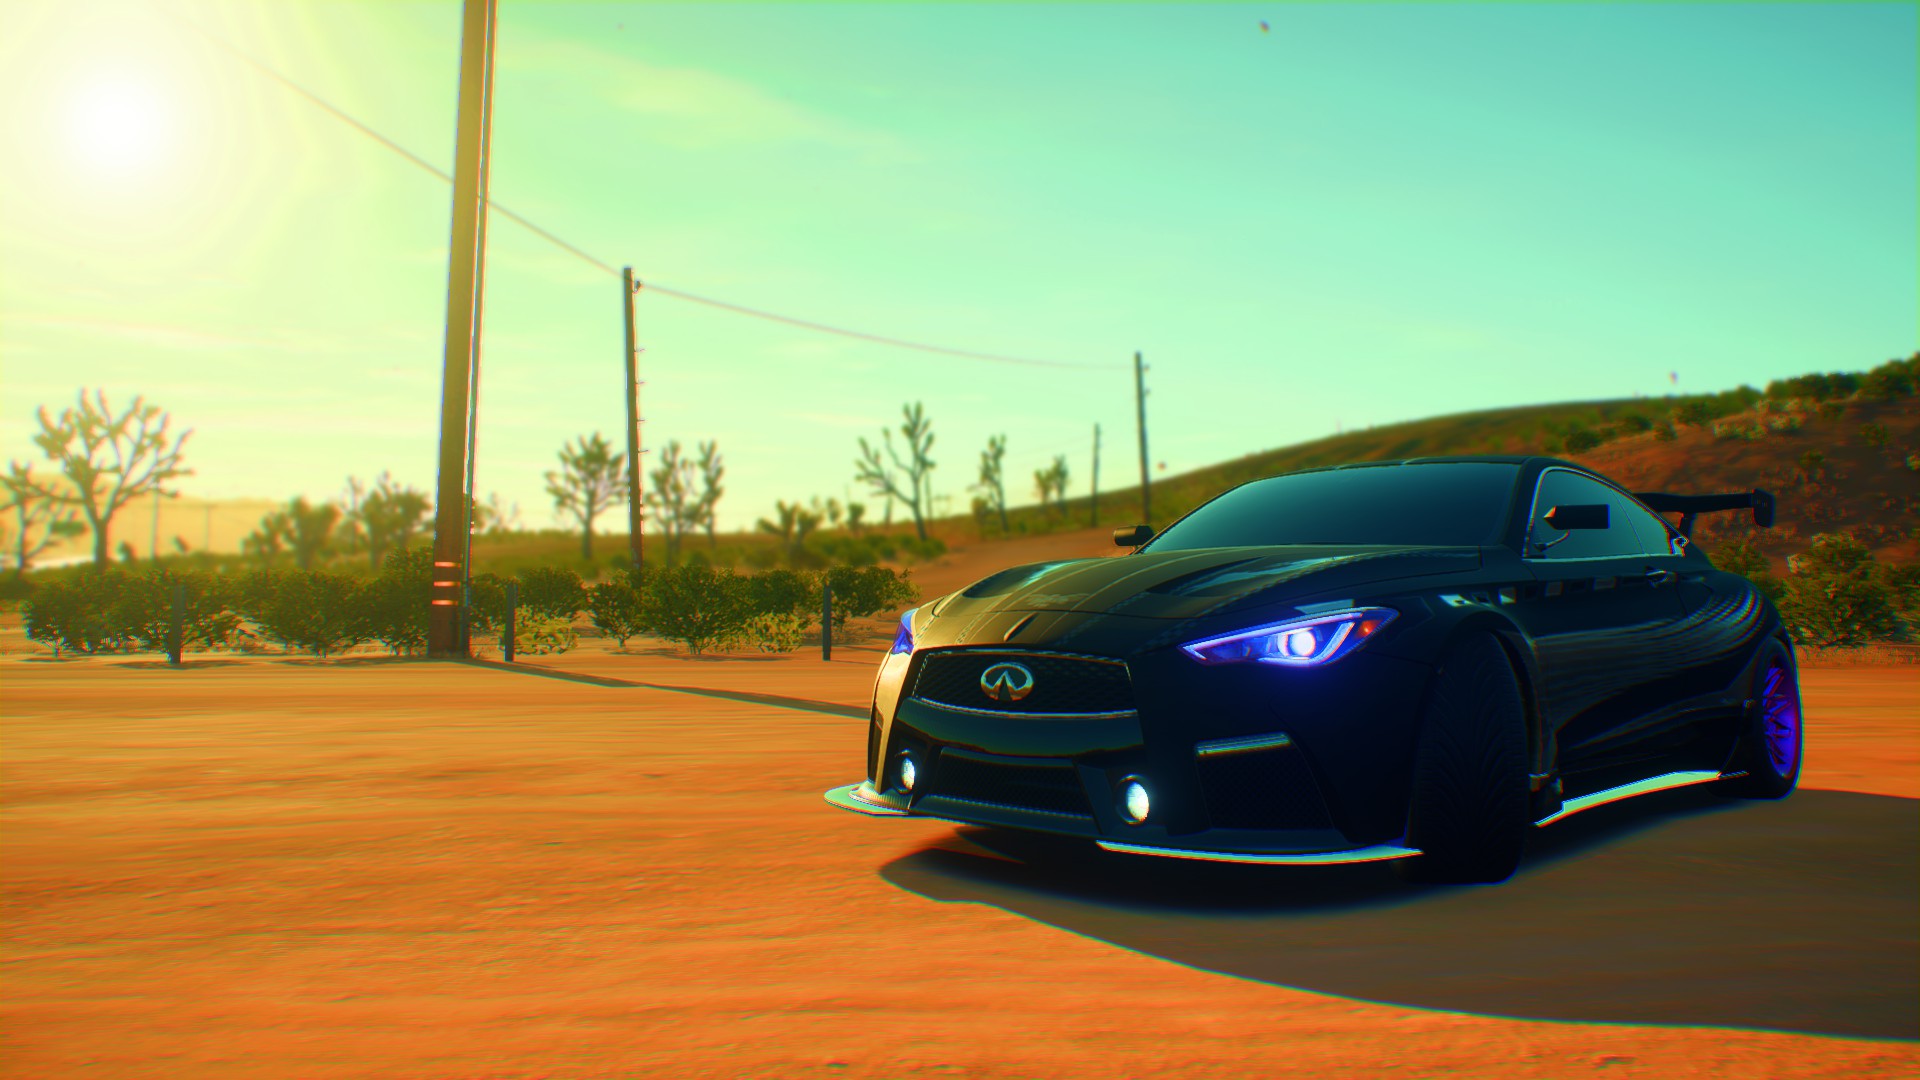 Need For Speed Need For Speed Payback Car Infiniti Black Cars Tuning Vehicle Video Games 1920x1080